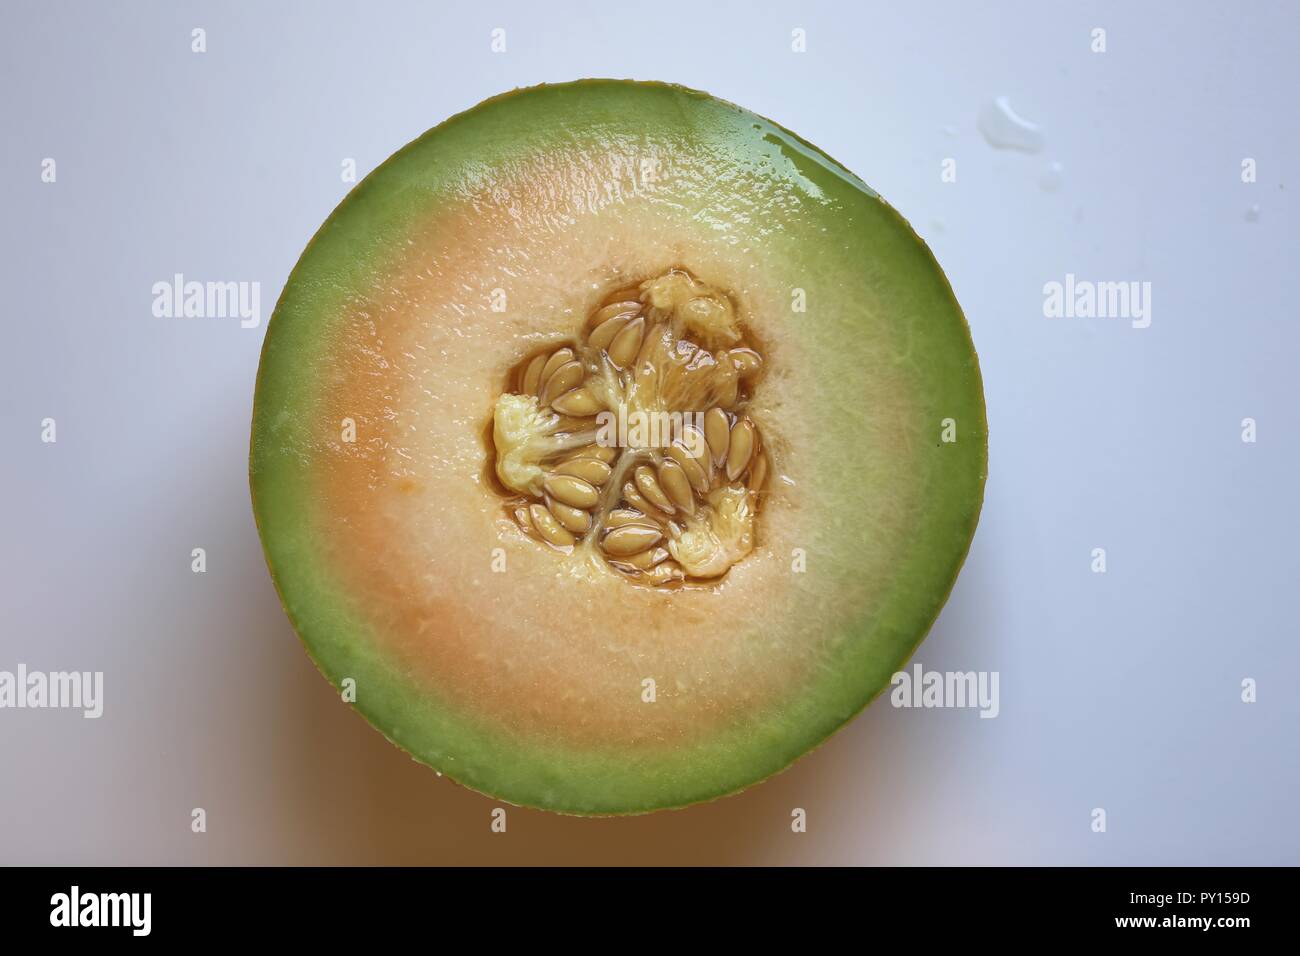 Melon Half, Top View. Fresh orange and green half melon with the seeds and the peel, close up, isolated on bright background. Stock Photo